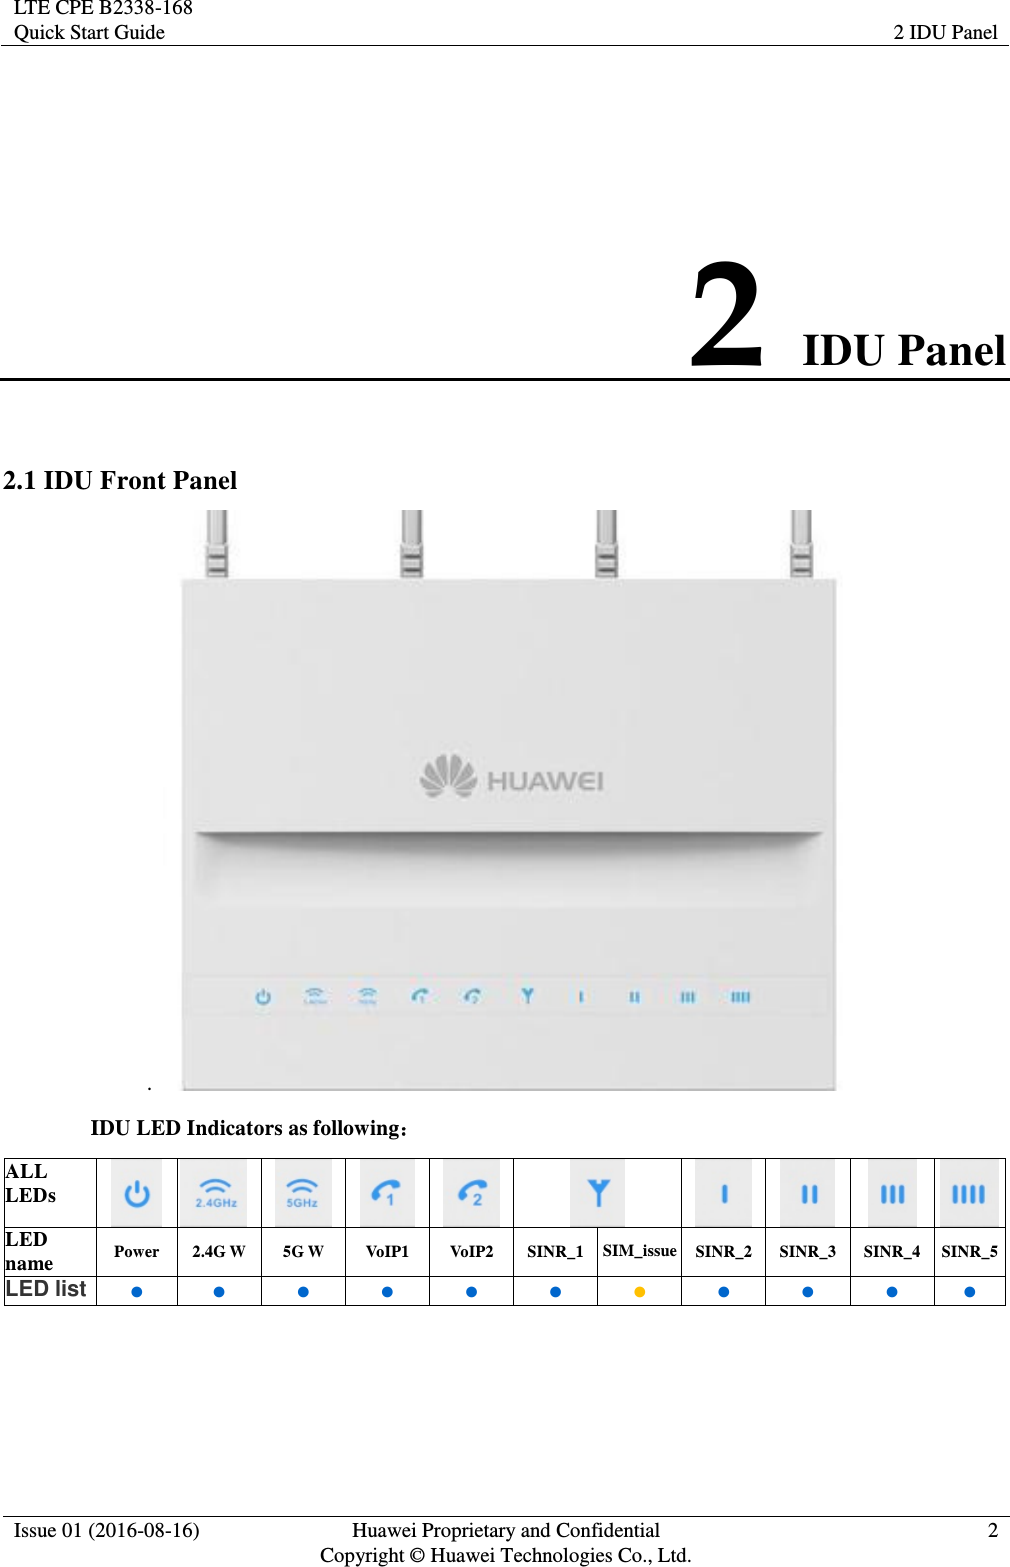 LTE CPE B2338-168 Quick Start Guide 2 IDU Panel  Issue 01 (2016-08-16) Huawei Proprietary and Confidential         Copyright © Huawei Technologies Co., Ltd. 2  2 IDU Panel 2.1 IDU Front Panel .   IDU LED Indicators as following： ALL LEDs           LED name Power 2.4G W 5G W VoIP1 VoIP2 SINR_1   SIM_issue SINR_2 SINR_3 SINR_4 SINR_5 LED list ● ● ● ● ● ● ● ● ● ● ●    